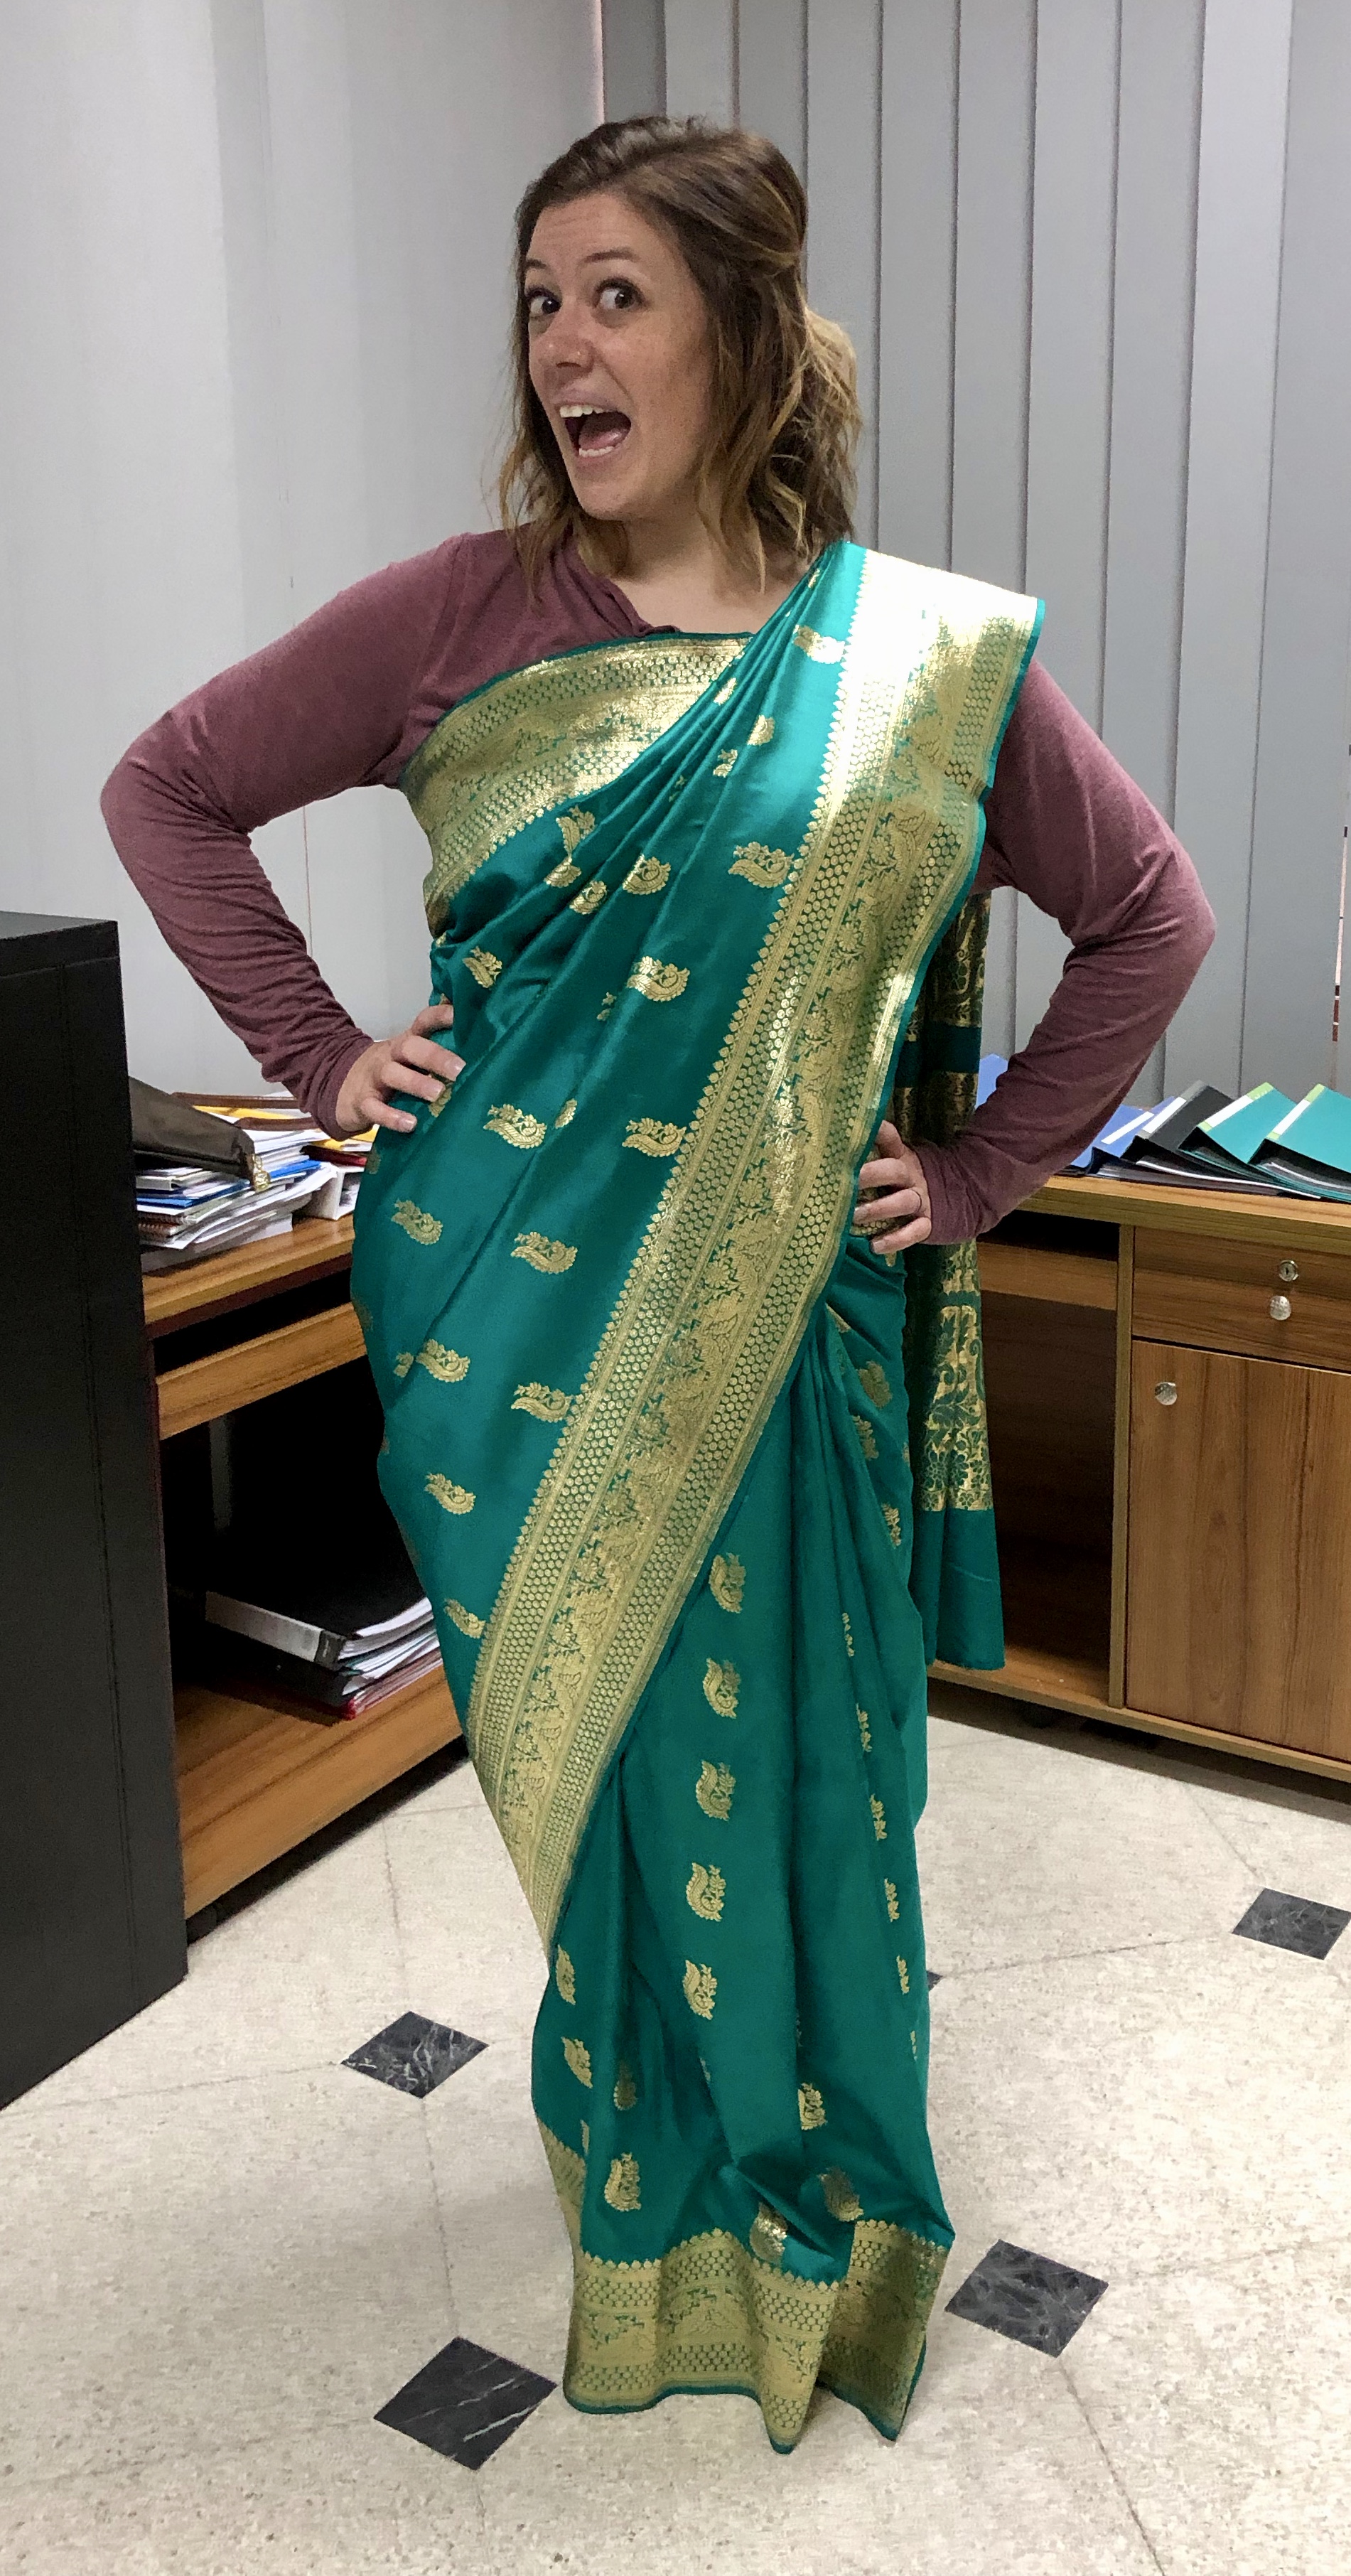 Trying on sarees at work